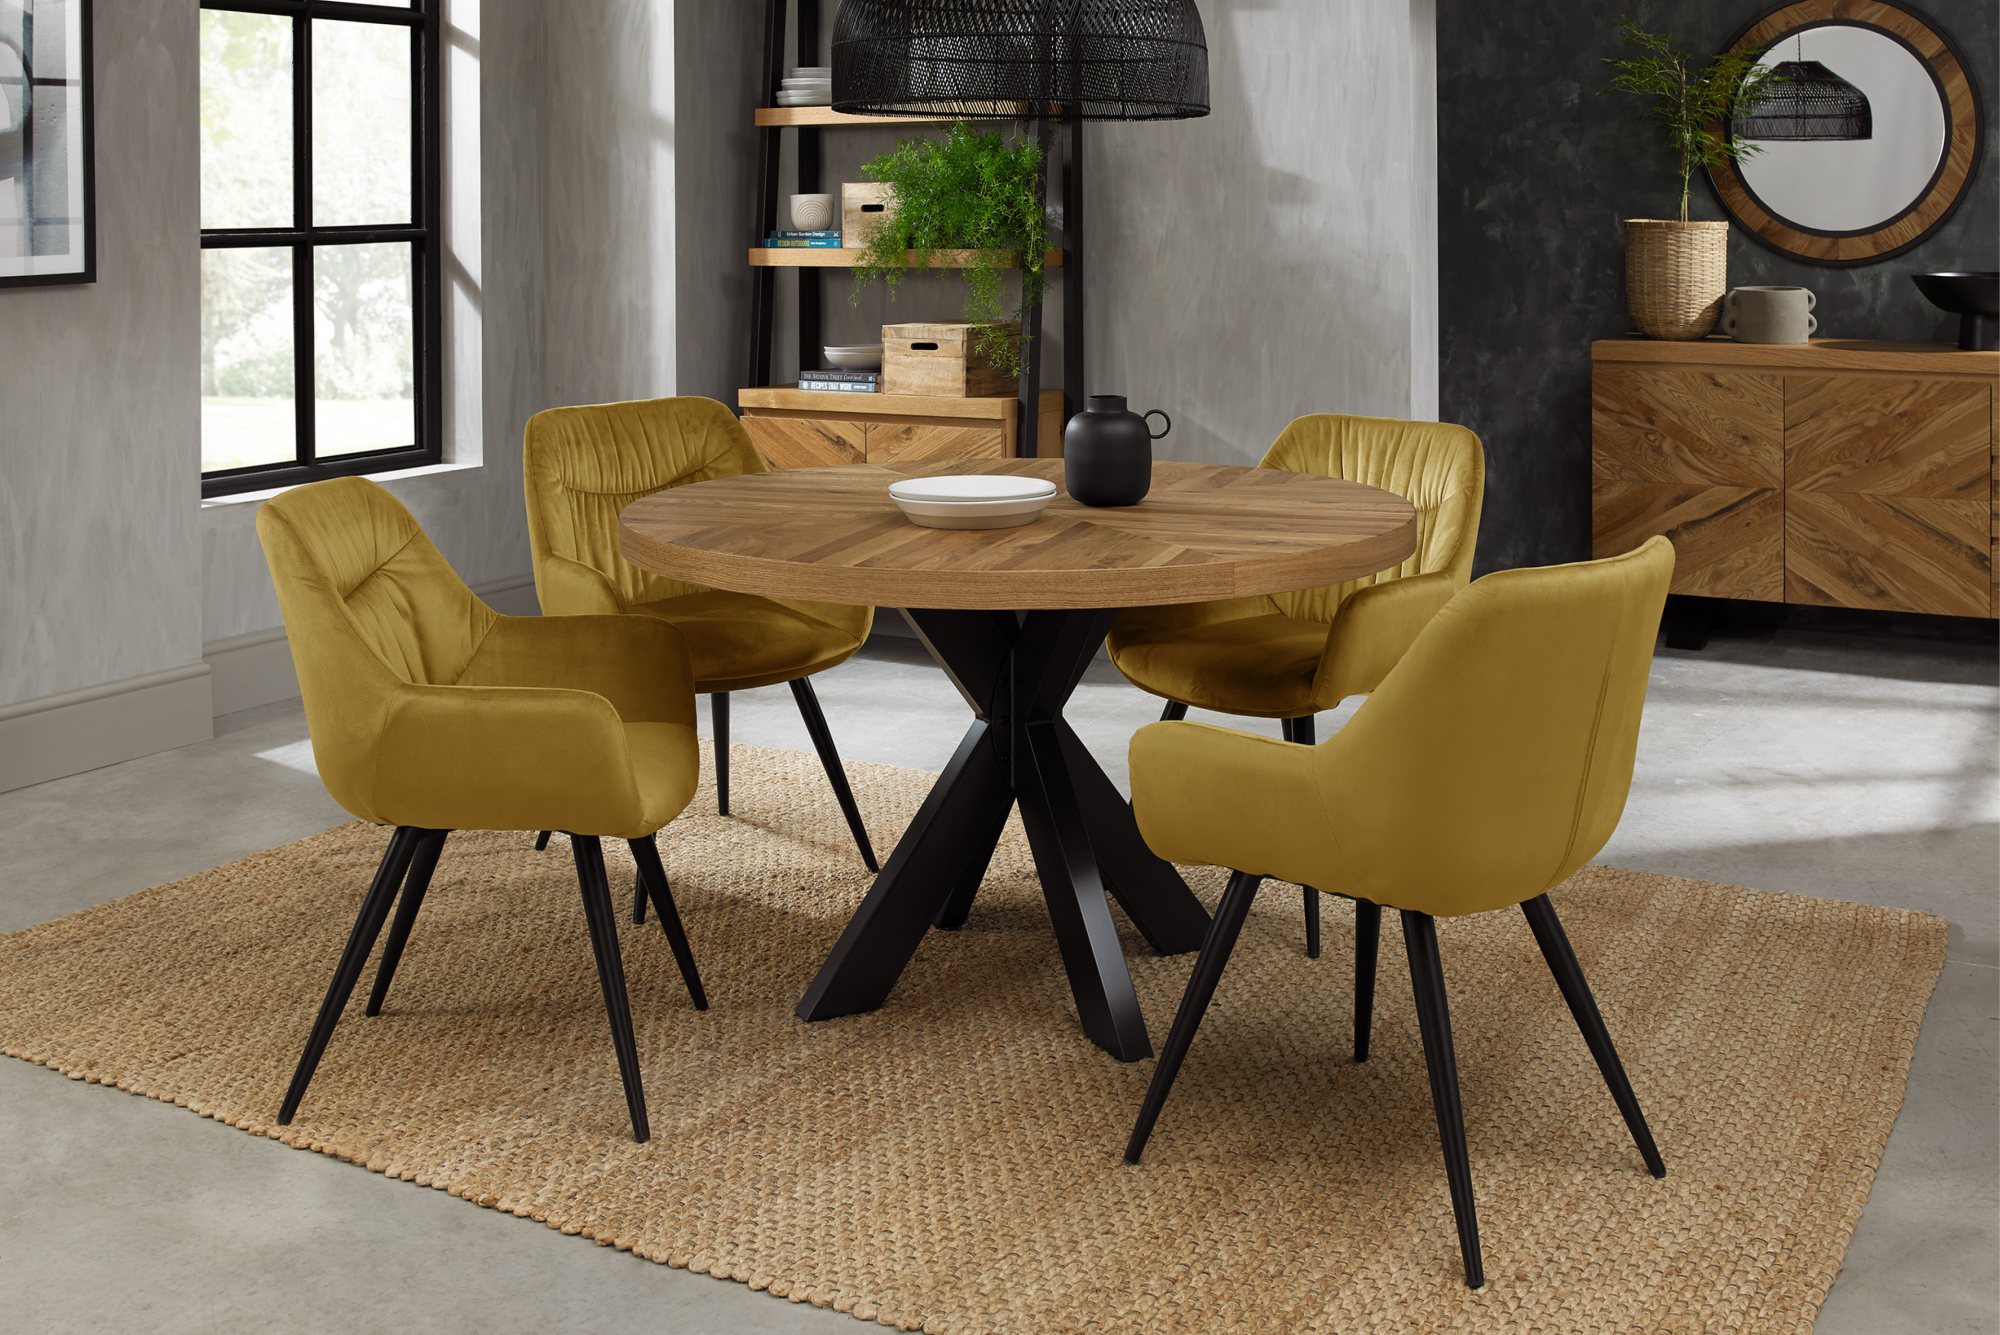 Home Origins Bosco Rustic Oak 4 seater dining table with 4 Dali chairs- mustard velvet fabric